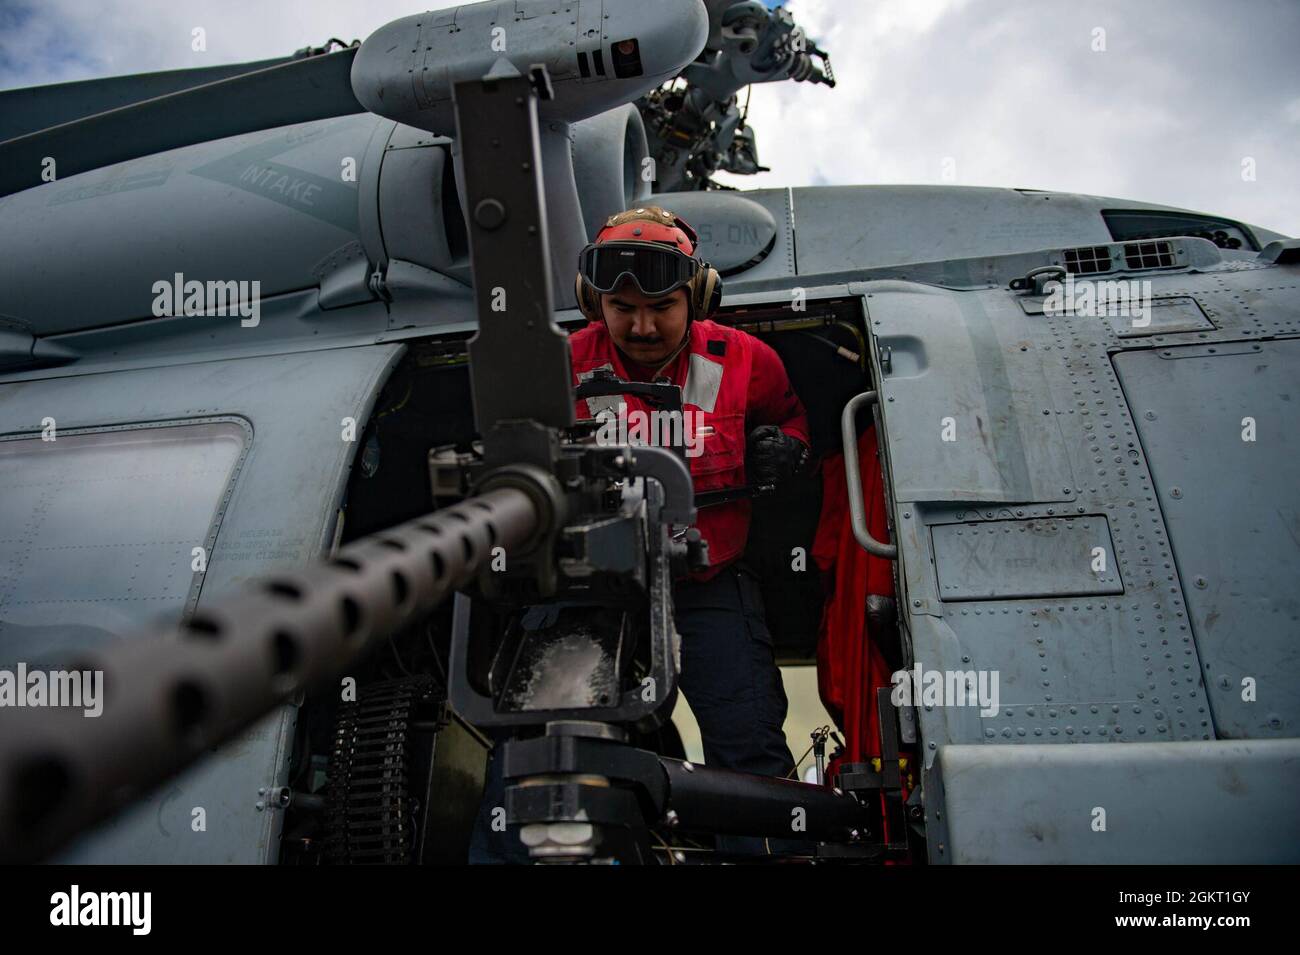 210624-N-NV699-2005 ATLANTIC OCEAN (June 24, 2021) Aviation Ordnanceman 3rd Class Samuel Garcia, from Berwyn, Illinois, prepares a .50-caliber gun mount on an MH-60R Sea Hawk helicopter, attached to the “Proud Warriors” of Helicopter Maritime Strike Squadron (HSM) 72, on the flight deck of the Nimitz-class aircraft carrier USS Harry S. Truman (CVN 75) during Group Sail. Group Sail provides an opportunity for the squadrons and ships of Carrier Strike Group (CSG) 8 to hone their skills and focus on teamwork and communication as they enter the integrated phase of pre-deployment training. Stock Photo